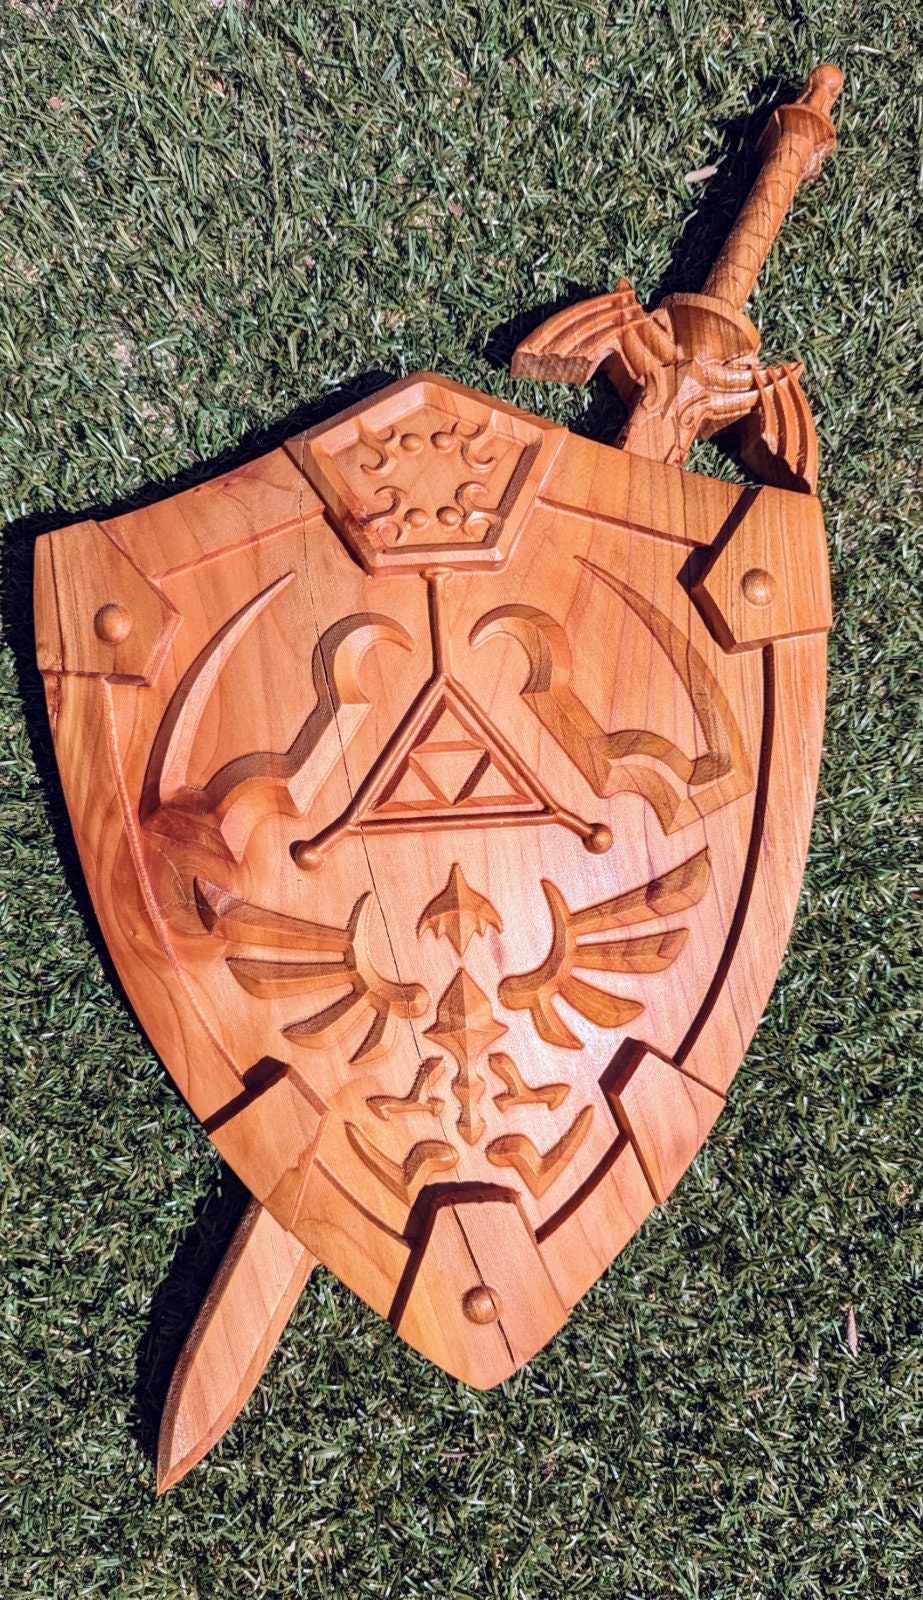 Link's Shield 3D from Zelda – Arclight CNC